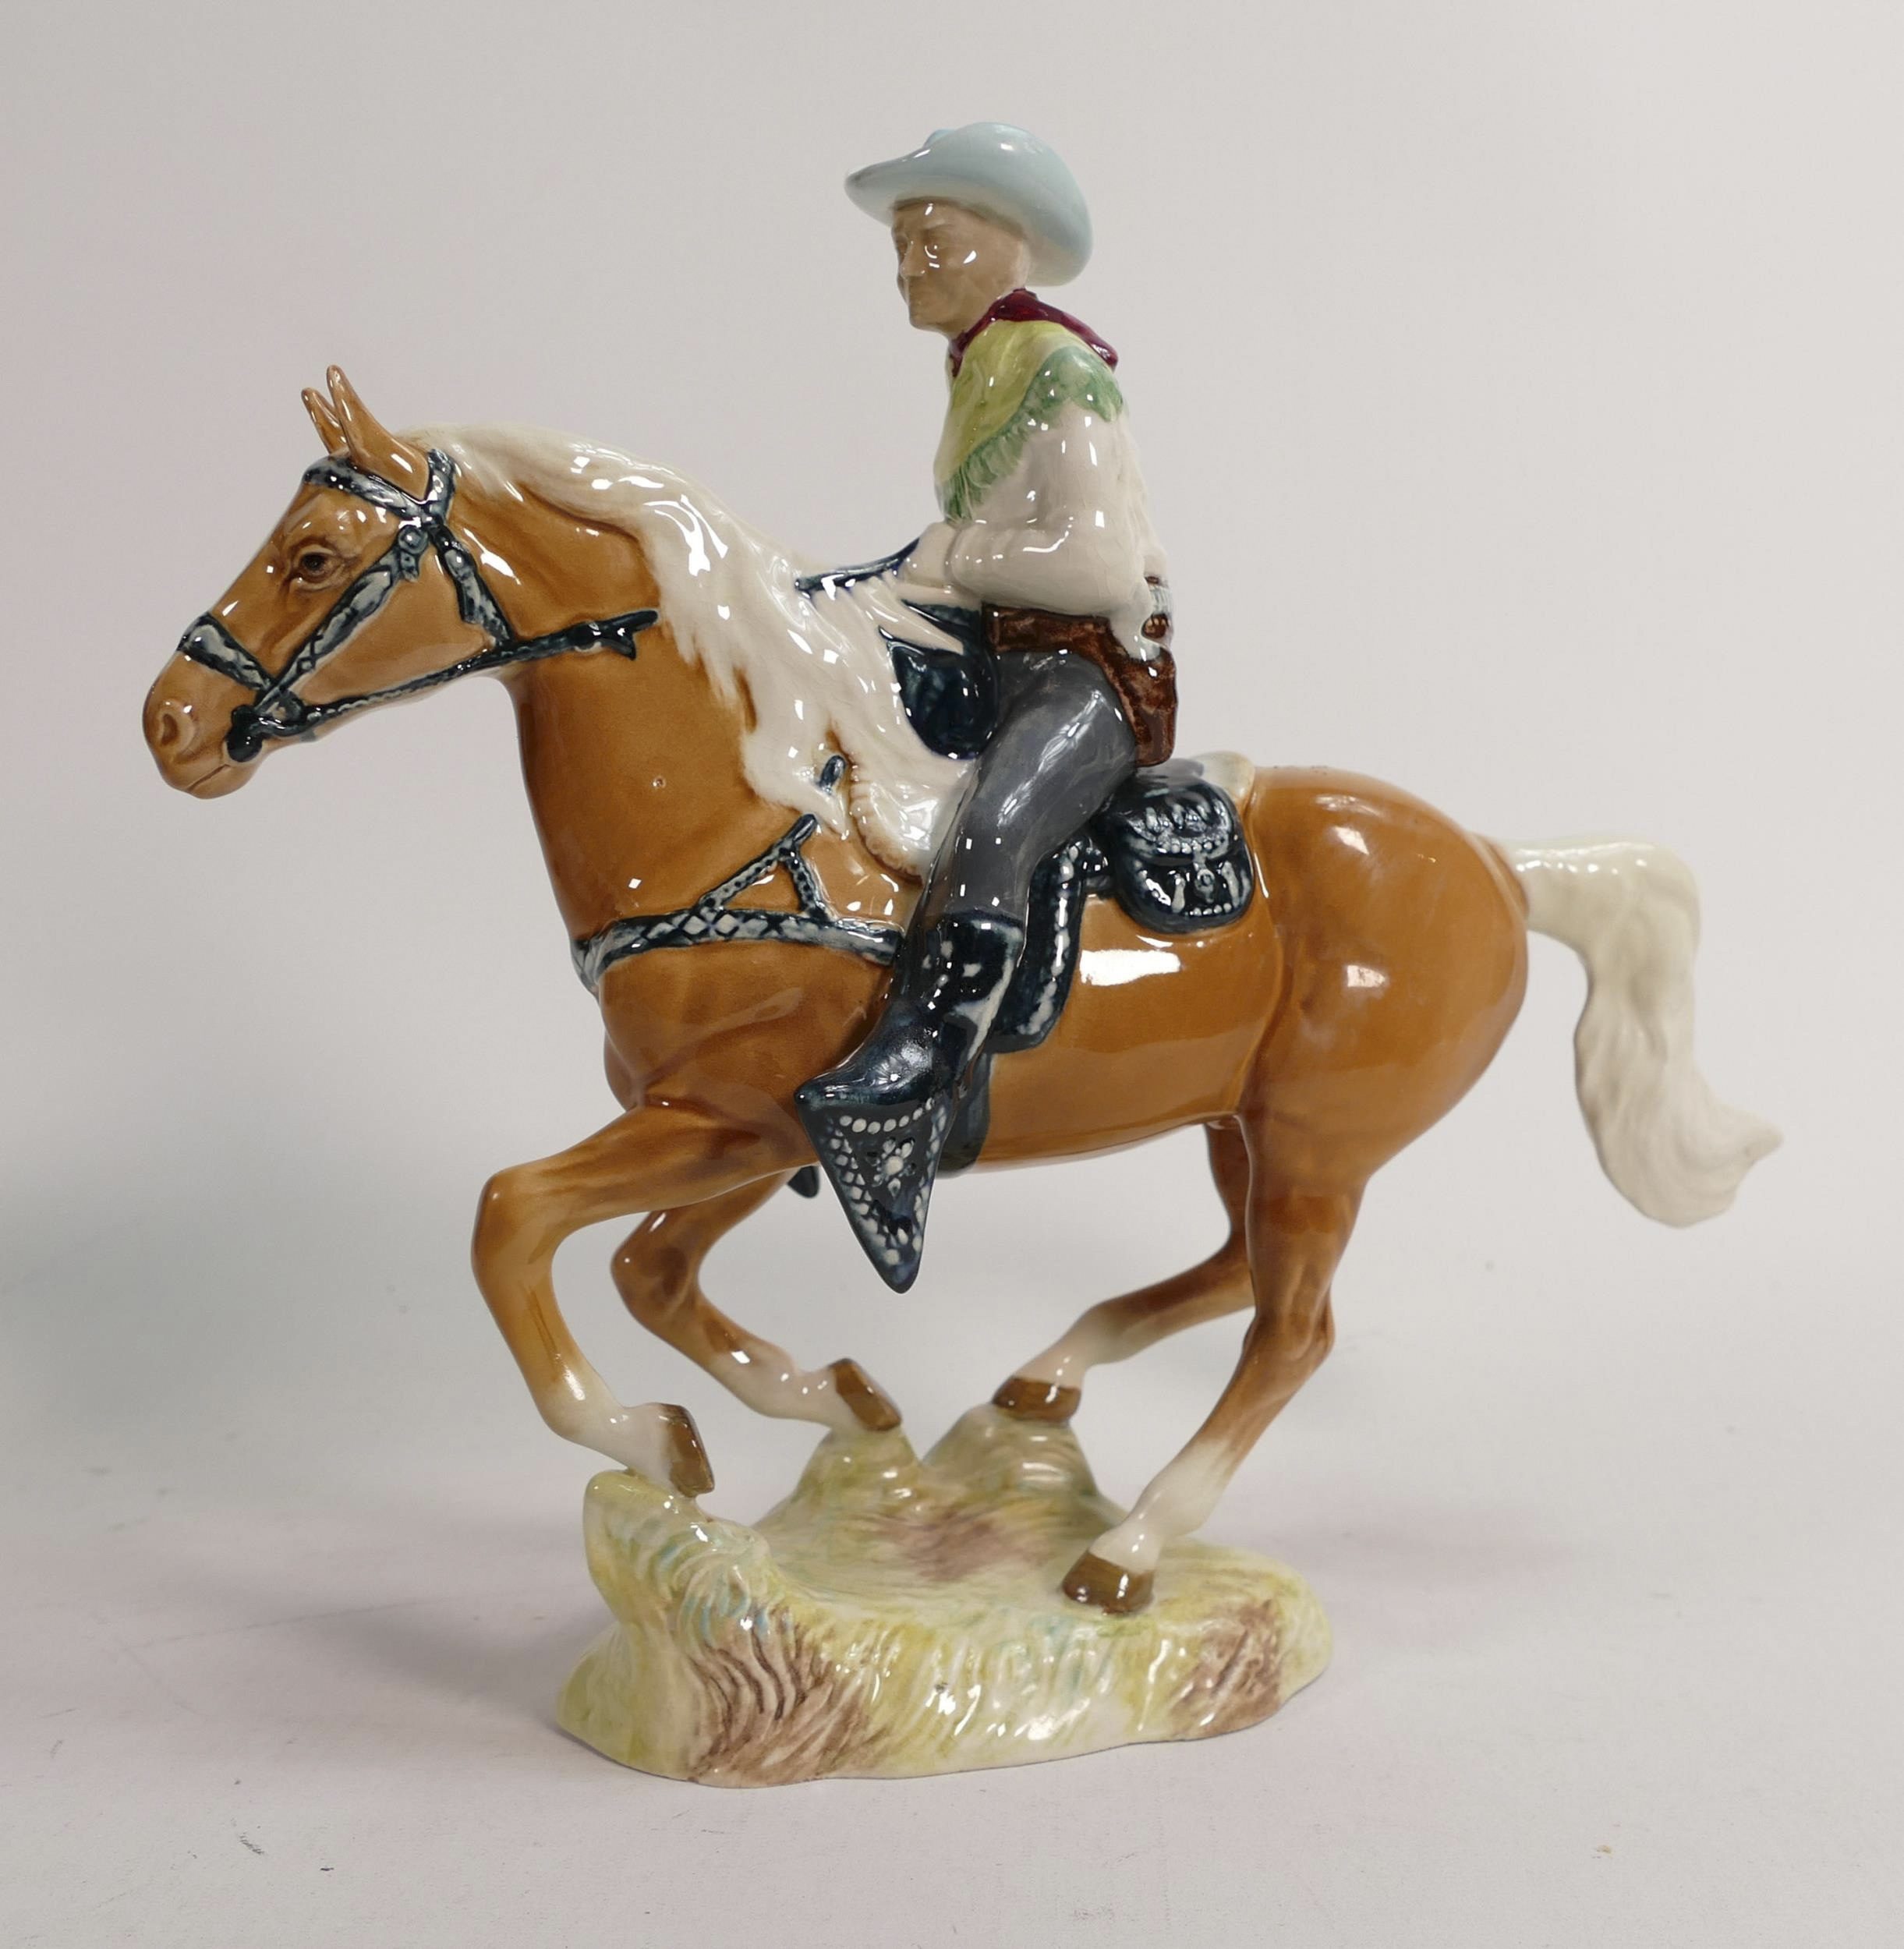 This charming Beswick Cowboy on a galloping palomino horse 1377 sold for £320.